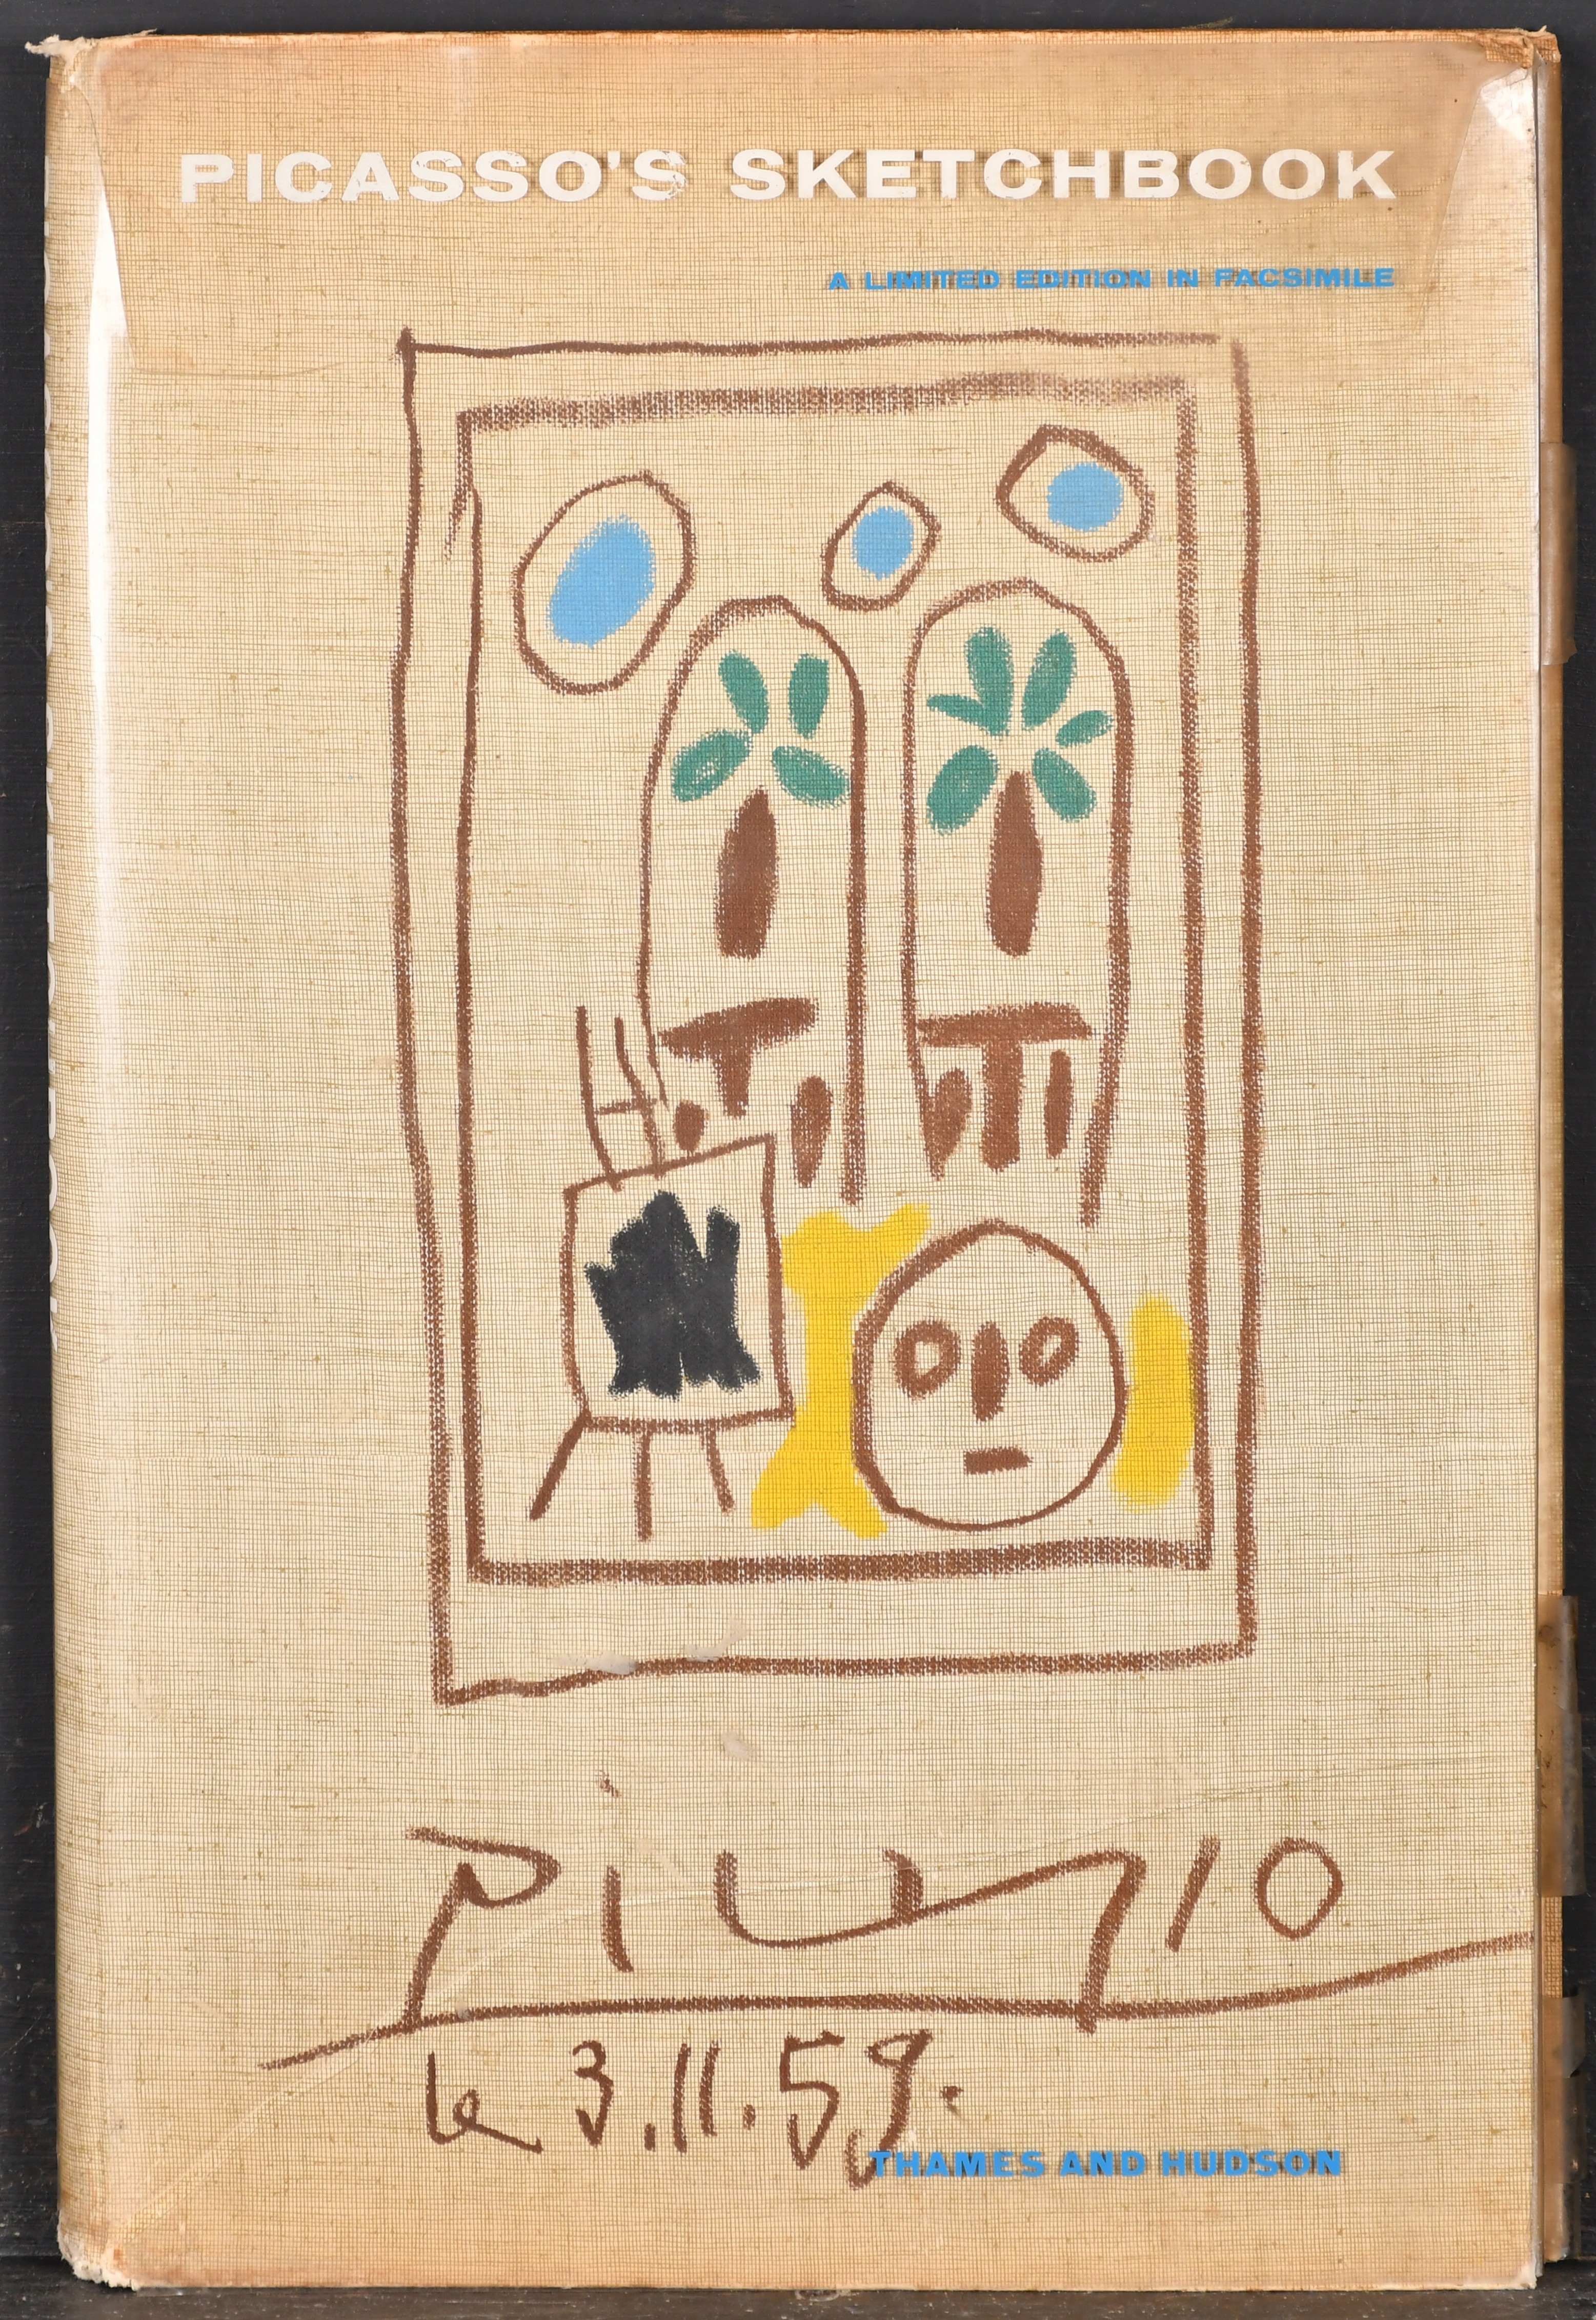 Pablo Picasso (1881-1973) Spanish. 'Picasso's Sketchbook', Limited Edition in facsimile, published - Image 2 of 4